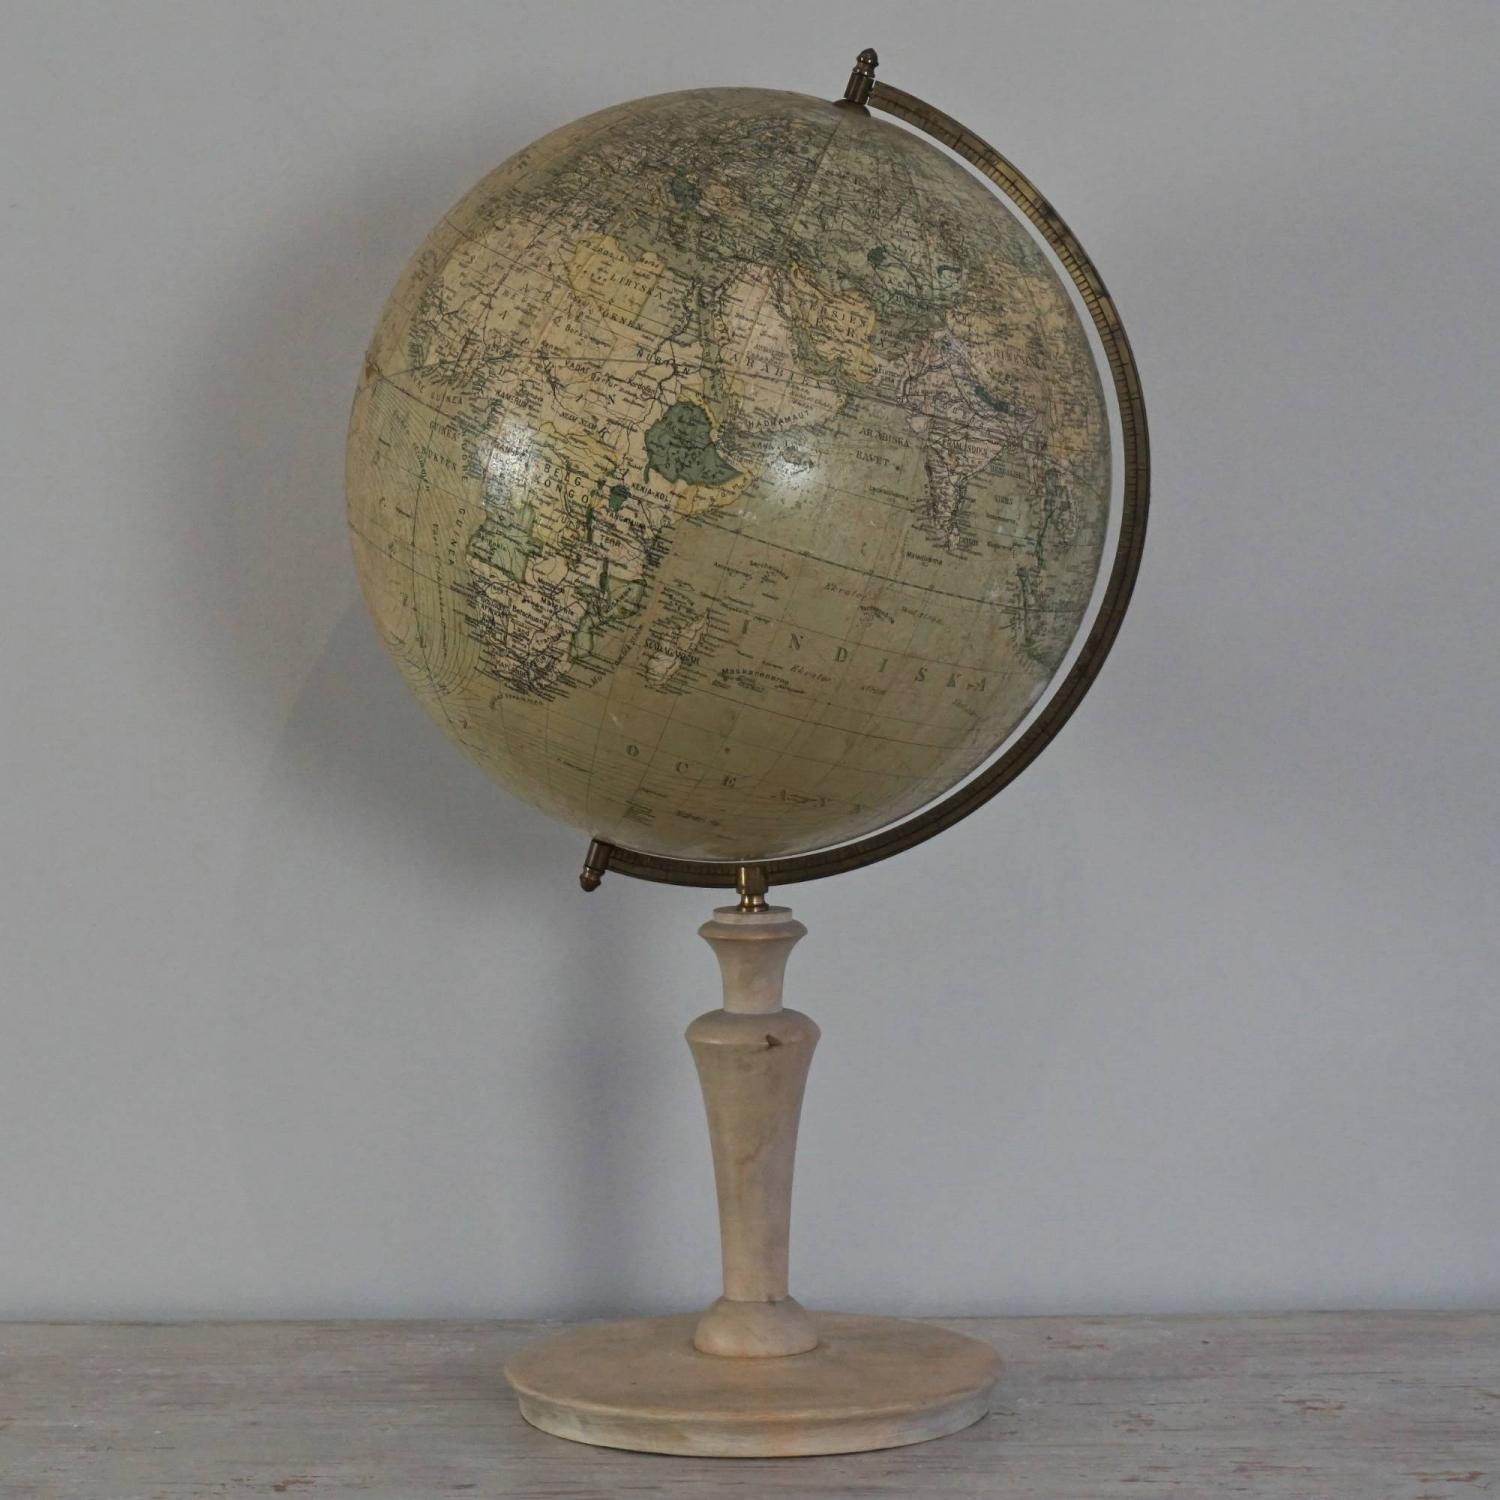 EARLY 20TH CENTURY SWEDISH GLOBE BY DR. NEUSE